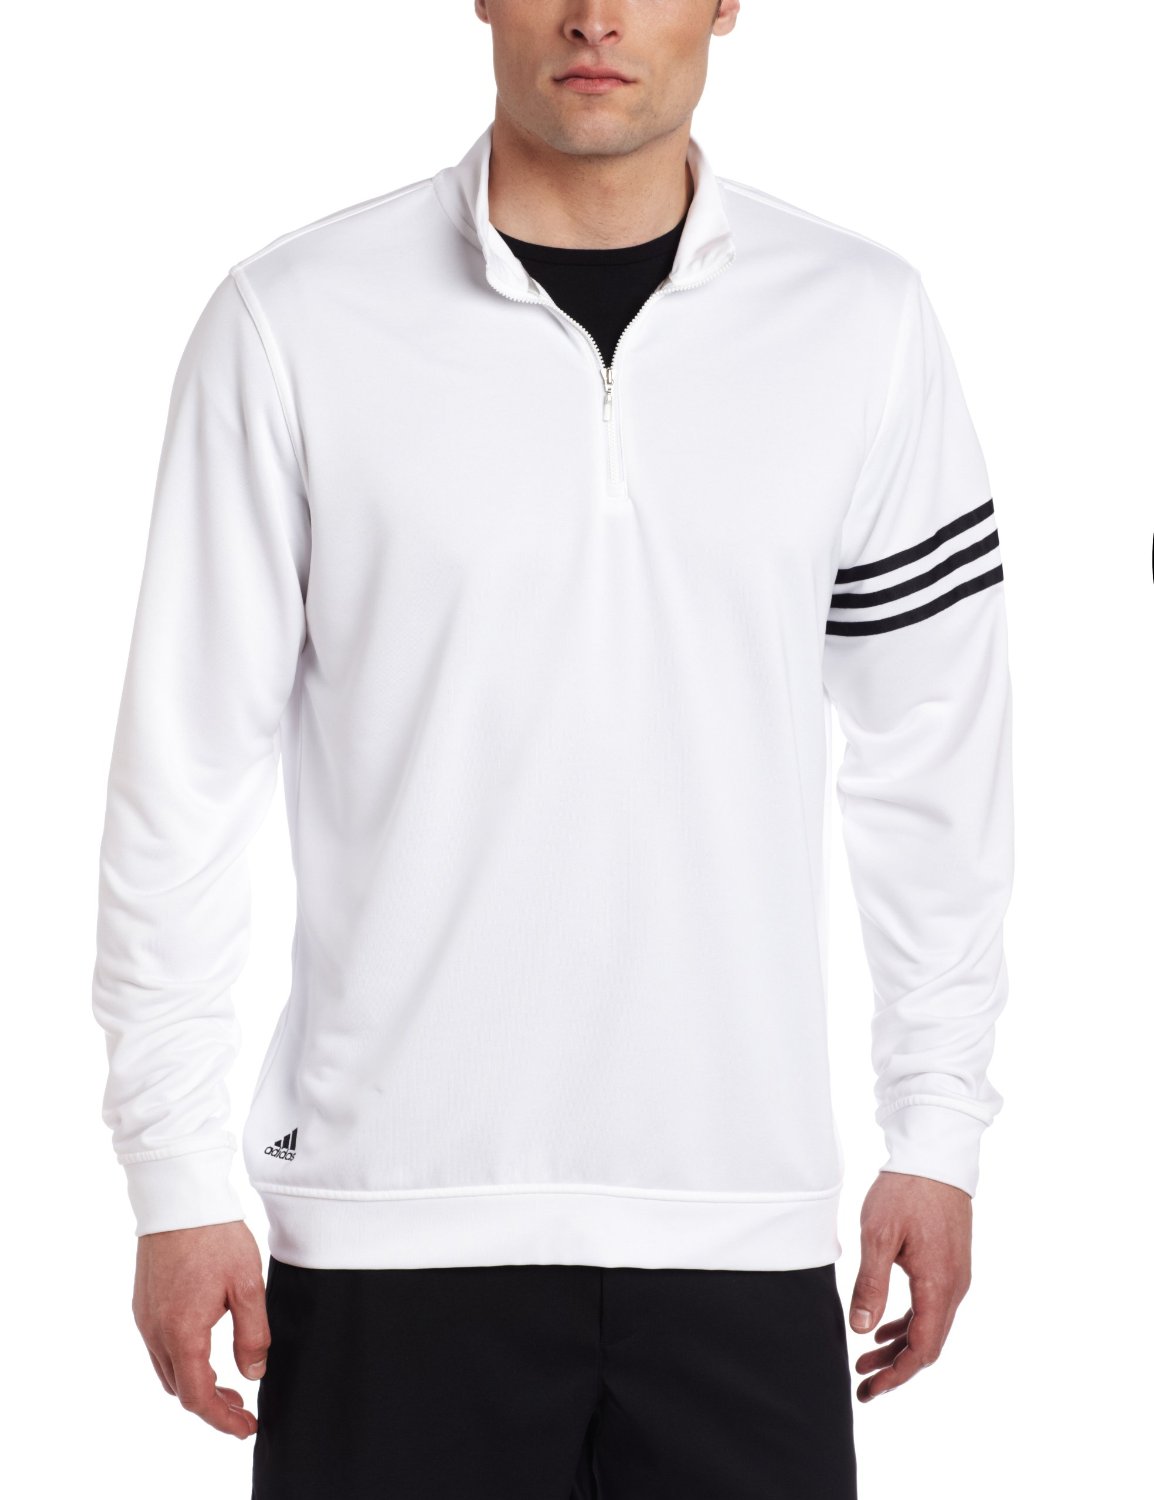 Adidas Mens Climalite 3-Stripes Pullovers